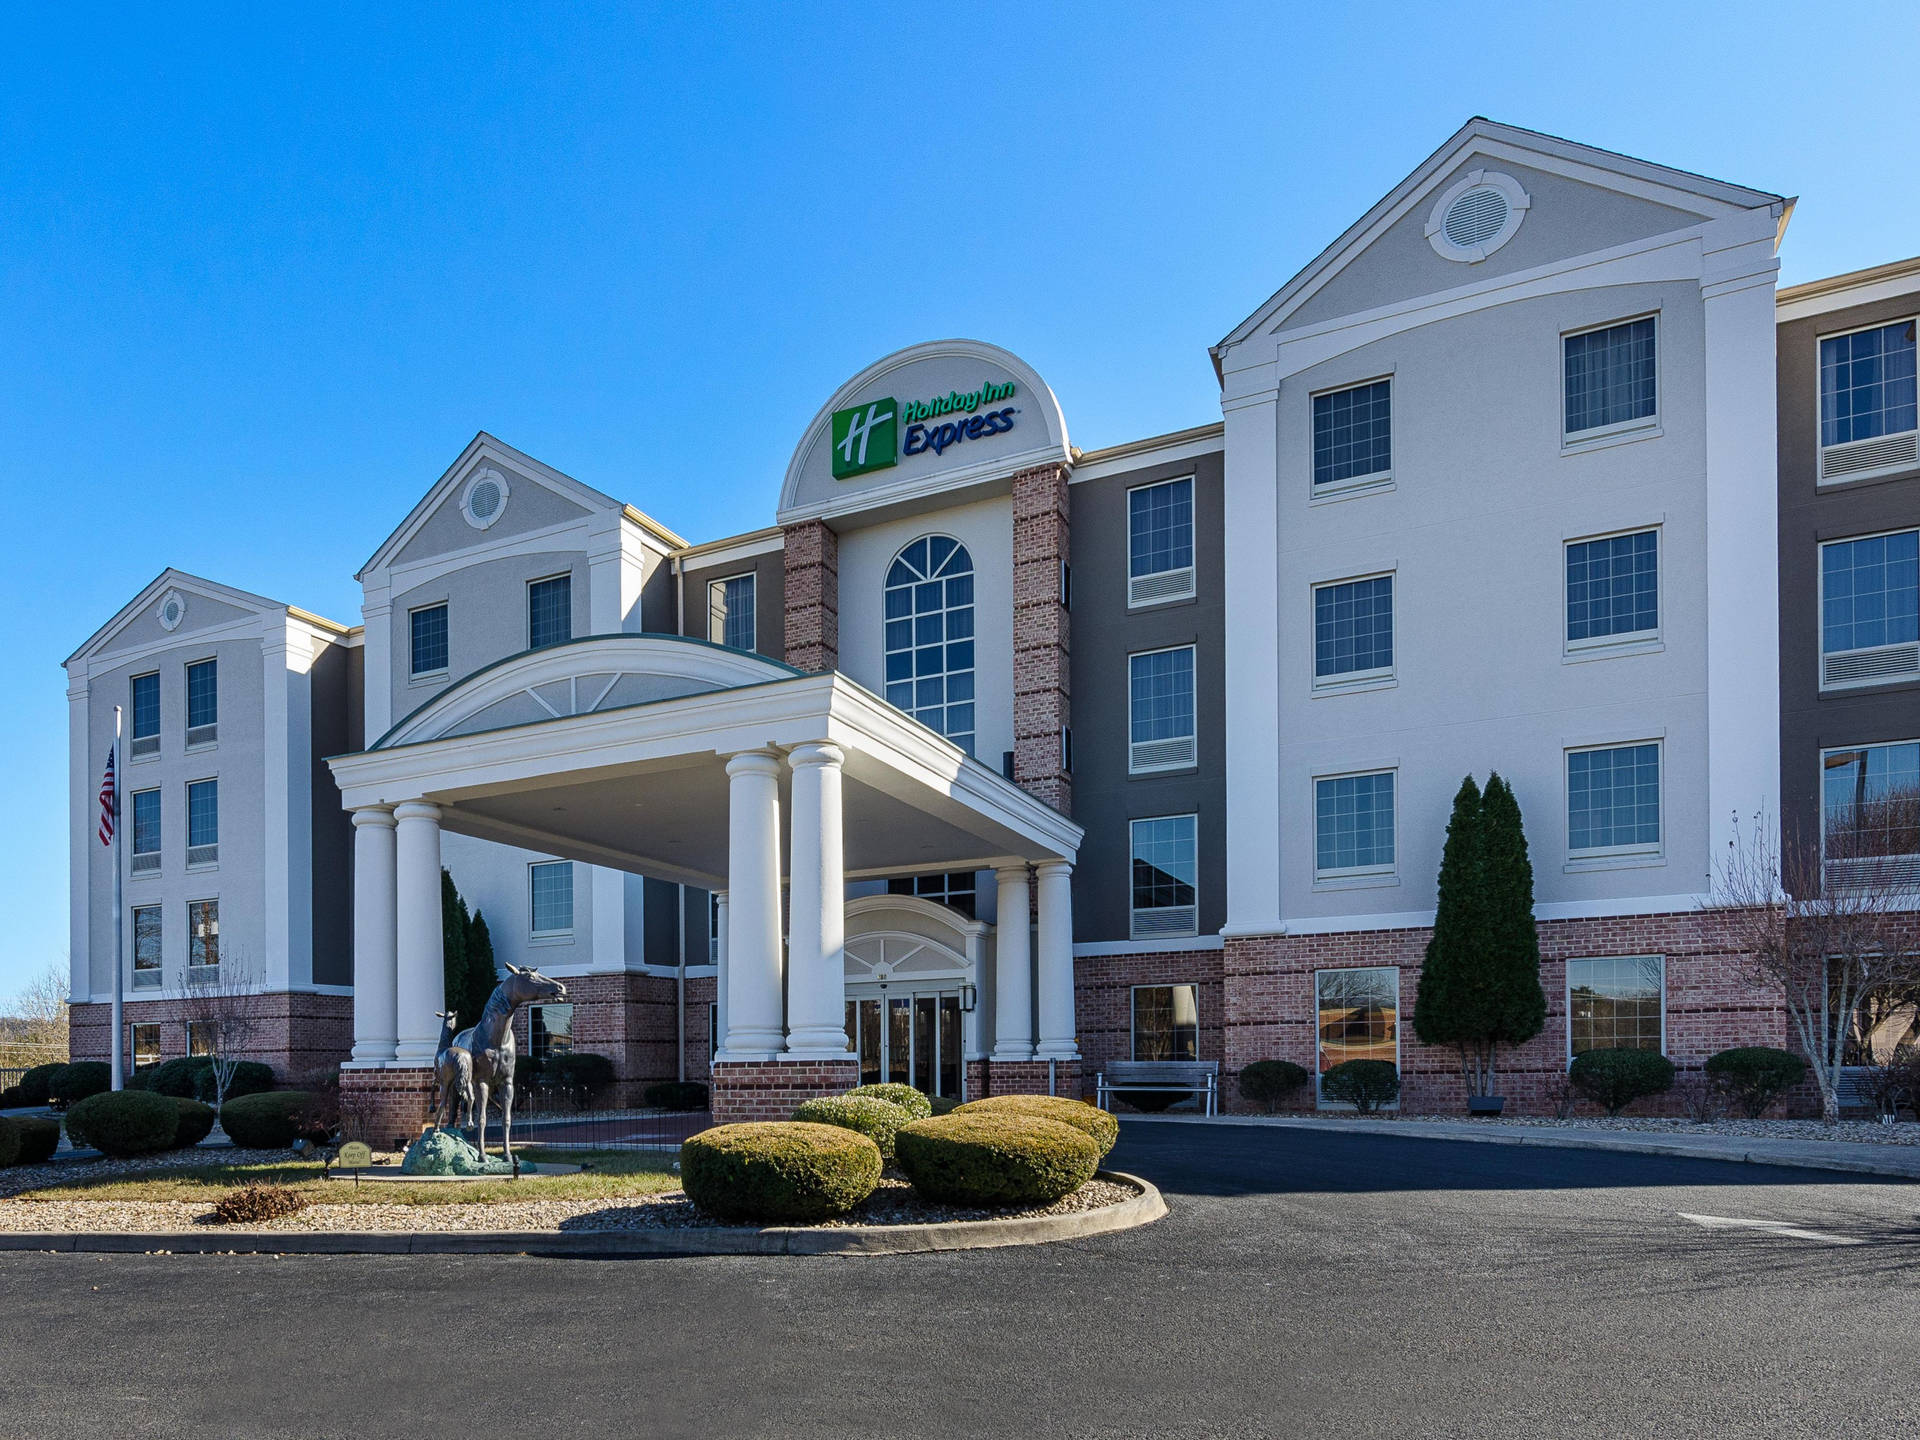 Lexingtonholiday Inn Express Is A Hotel Located In The City Of Lexington, Offering Comfortable Accommodations And Excellent Amenities For Travelers. It Is A Popular Choice For Both Business And Leisure Guests Due To Its Convenient Location, Friendly Staff, And Affordable Rates. The Hotel Features Spacious Rooms, Complimentary Breakfast, Free Wi-fi, A Fitness Center, And An Outdoor Pool. Whether You Are Visiting Lexington For Work Or Pleasure, Lexington Holiday Inn Express Is A Great Option For Your Stay. Fondo de pantalla